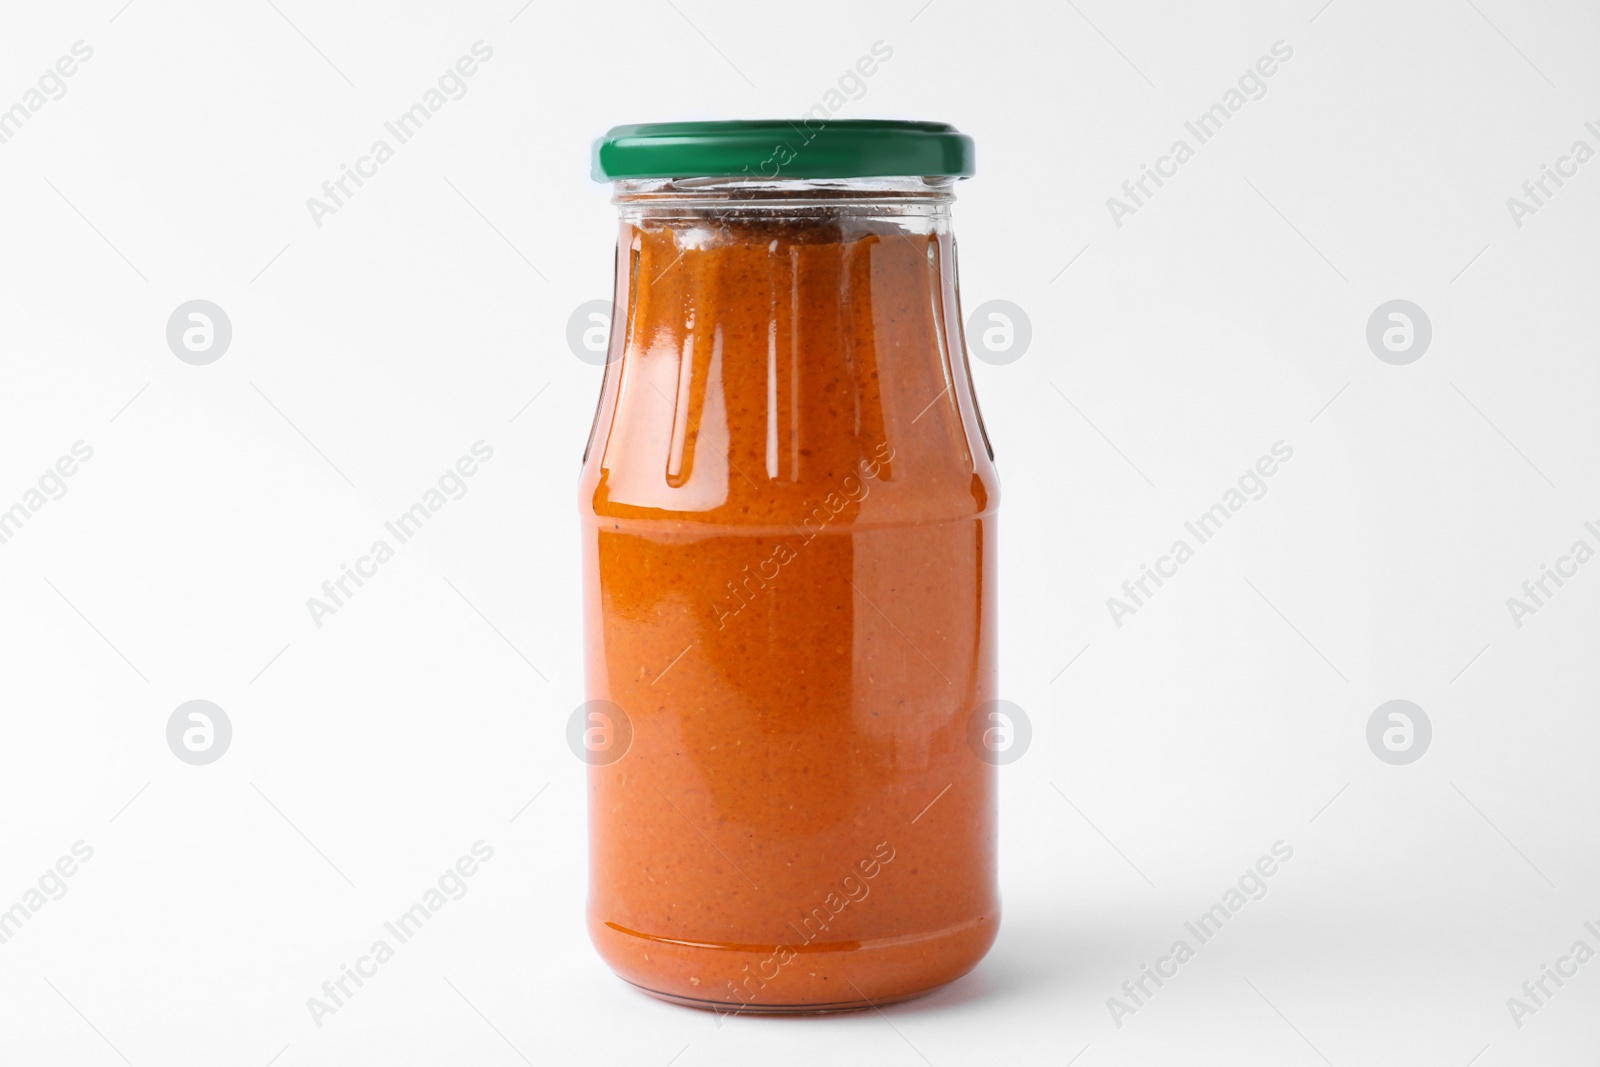 Photo of Jar of butternut squash spread on white background. Pickled food